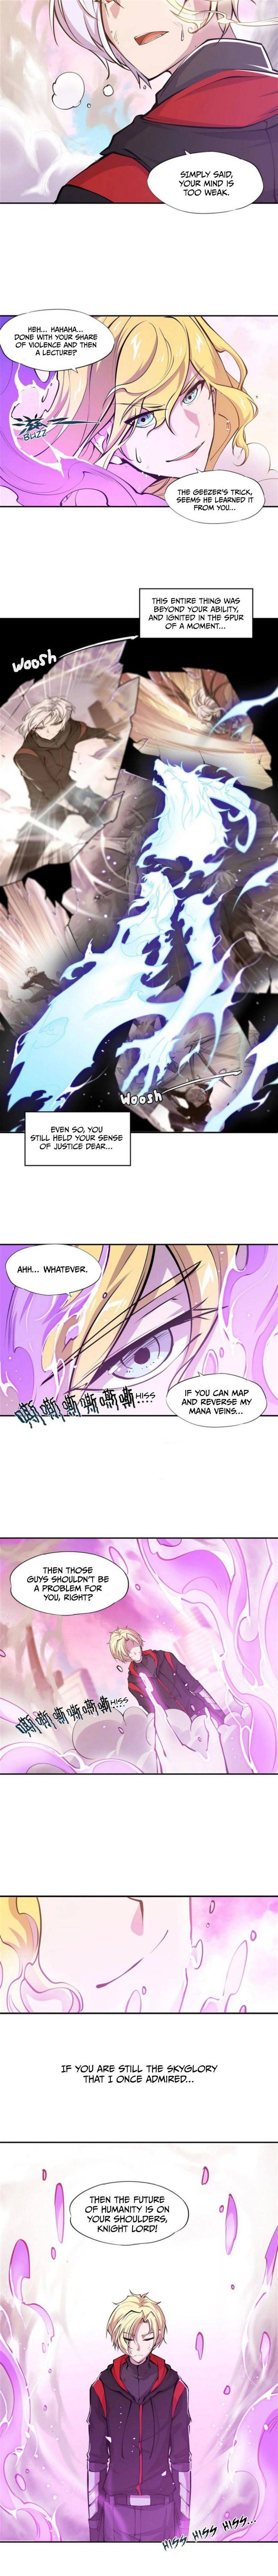 The Blood Princess and the Knight Chapter 98 page 6